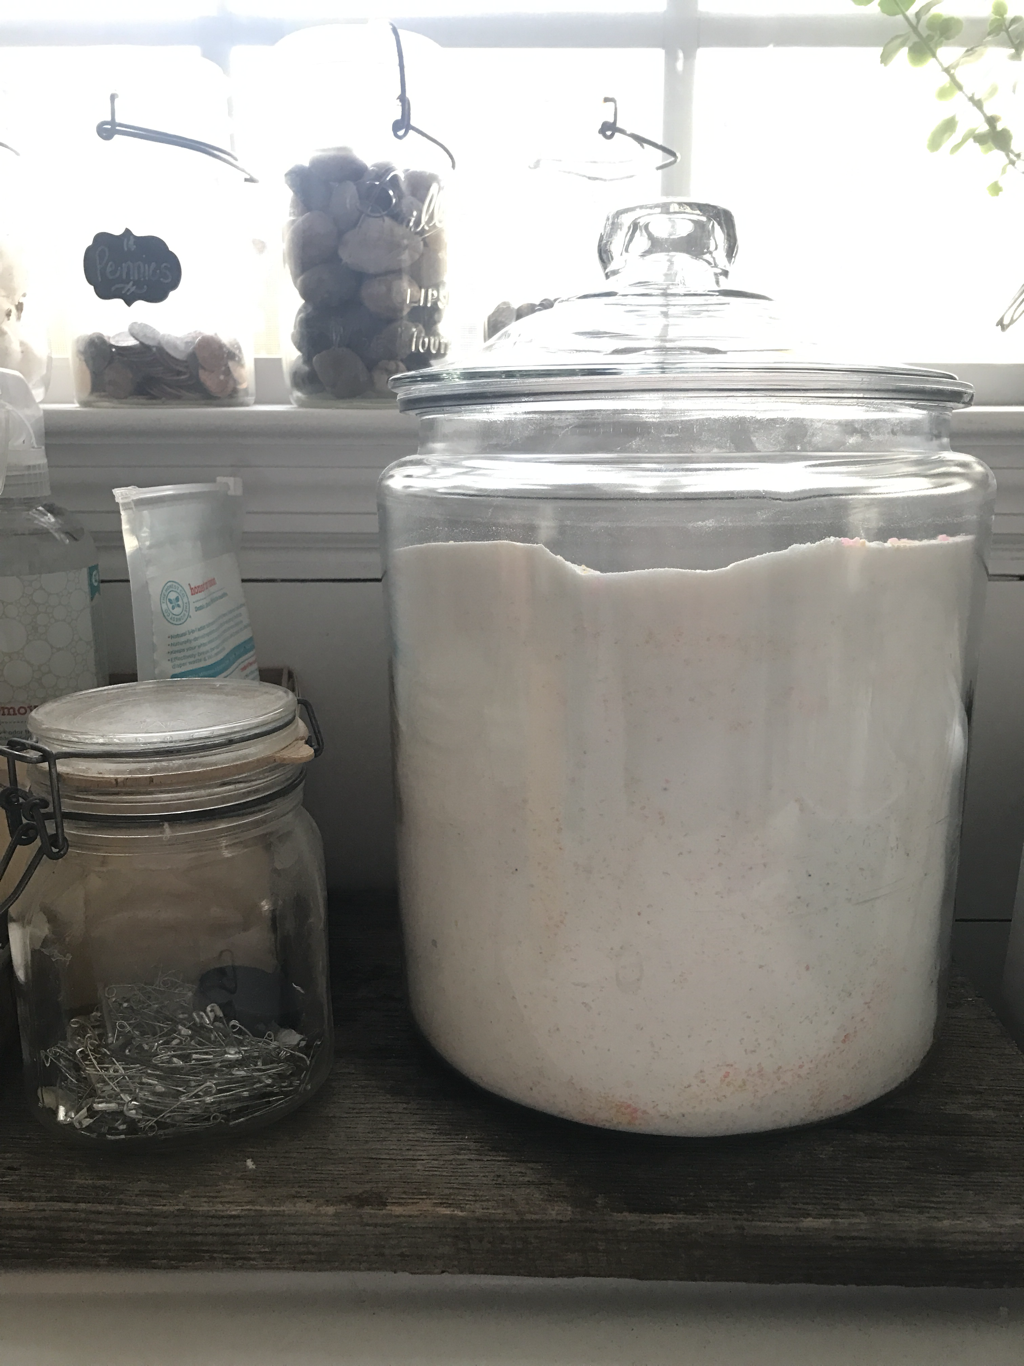 DIY Laundry Soap that WORKS